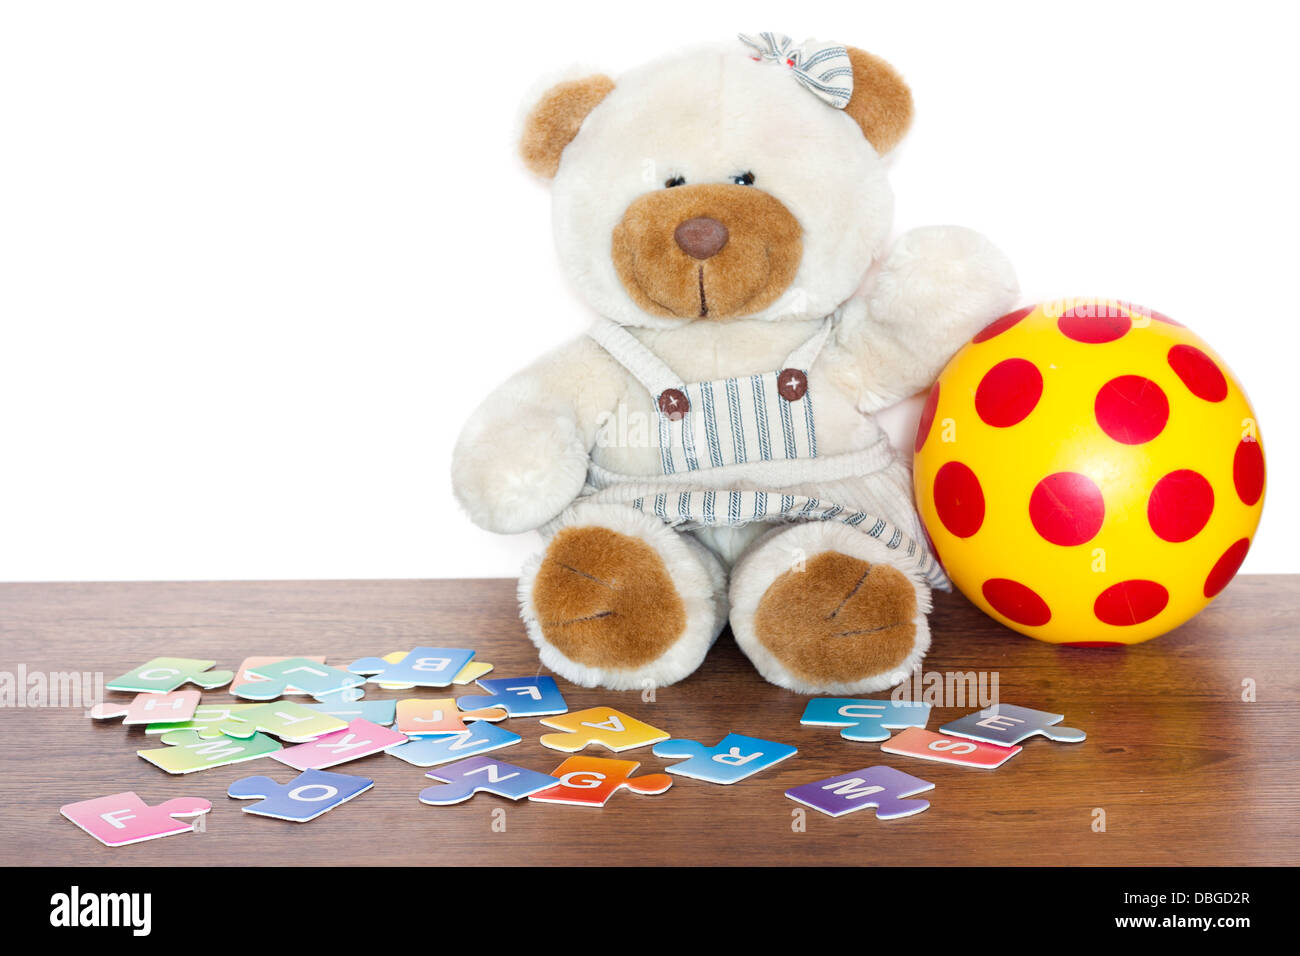 Education and fun for children with teddy bear concept Stock Photo